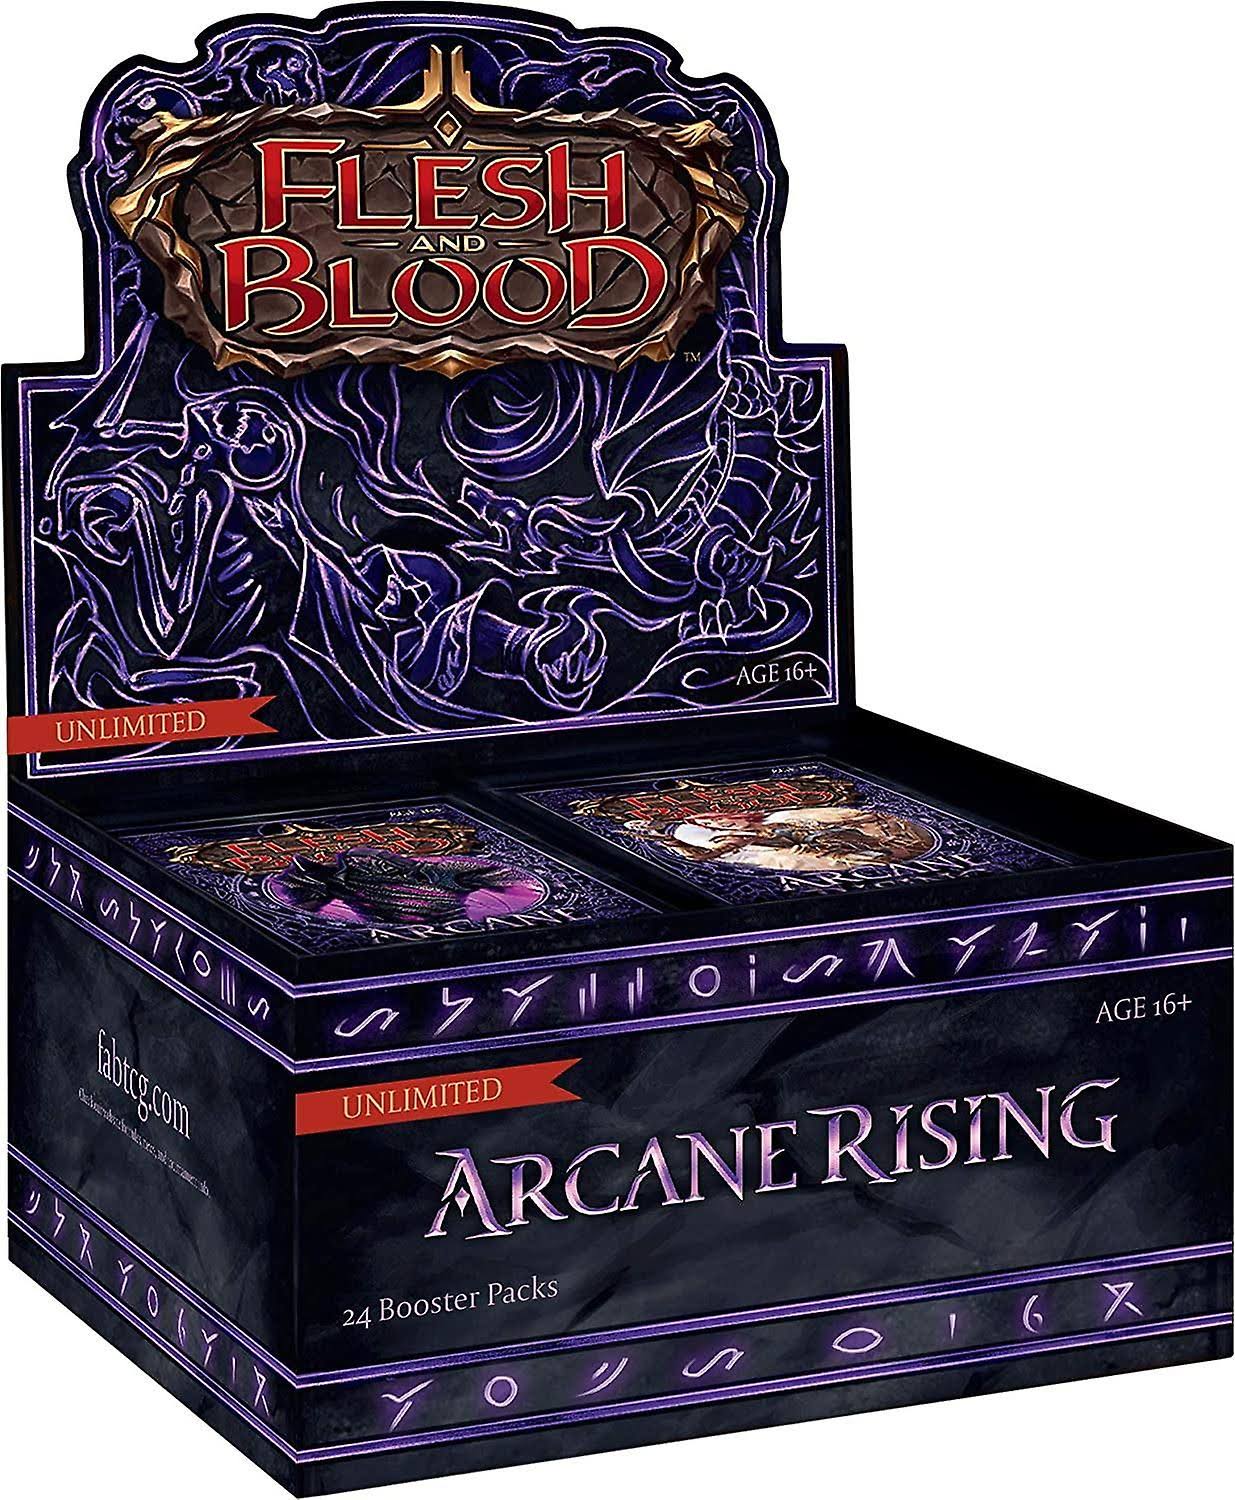 FLESH AND BLOOD TCG ARCANE RISING UNLIMITED BOOSTER (PACK OF 24)